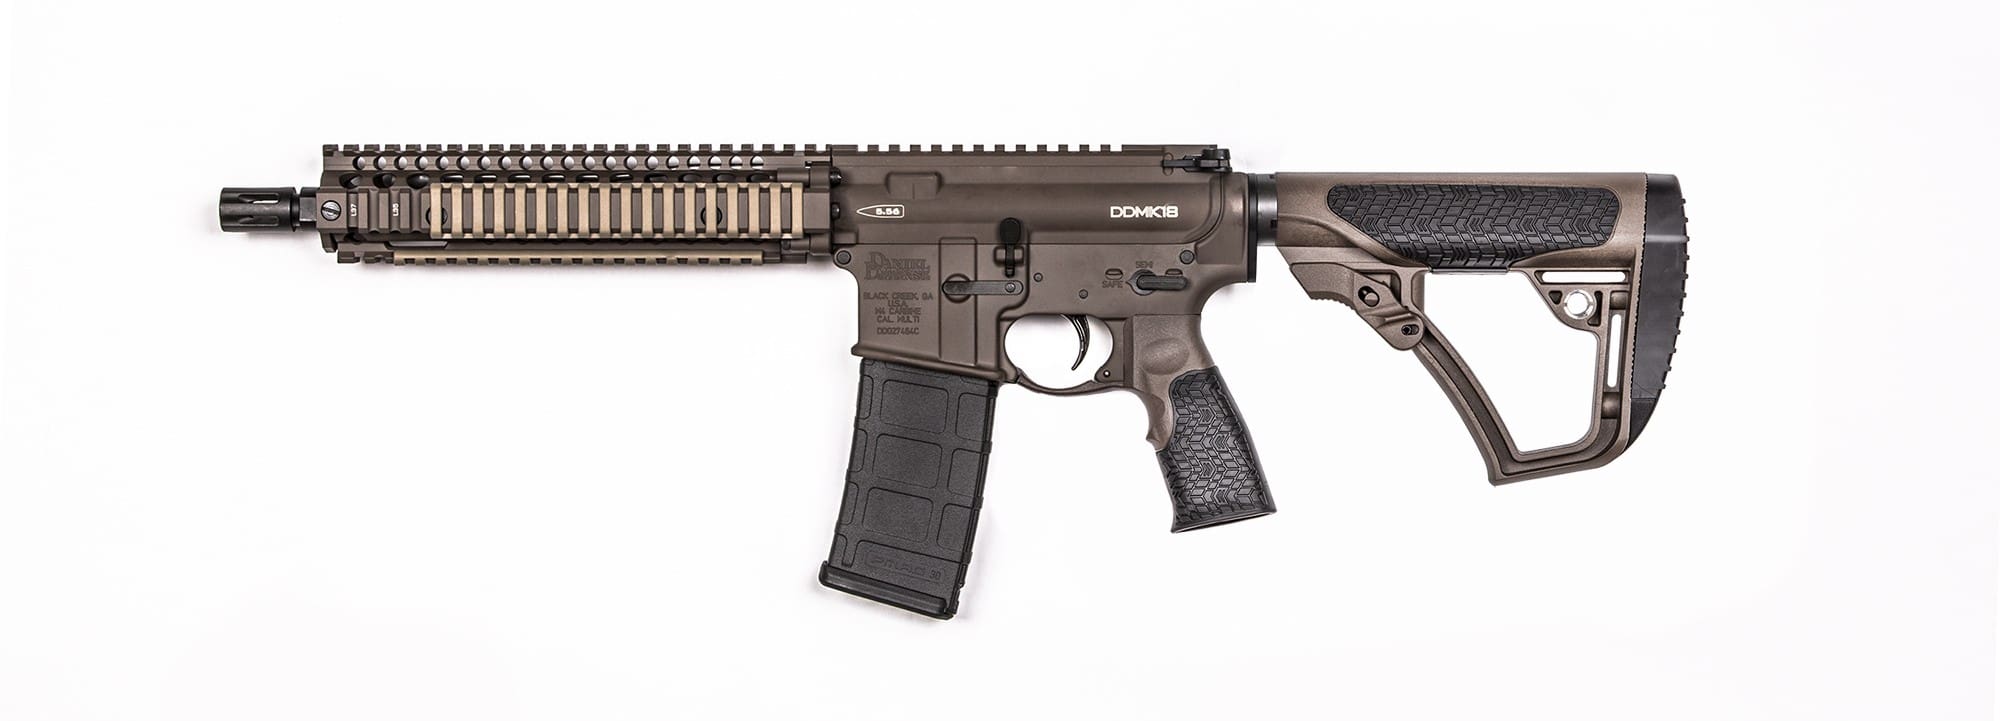 New Products And Offerings From Daniel Defense - Soldier Systems Daily